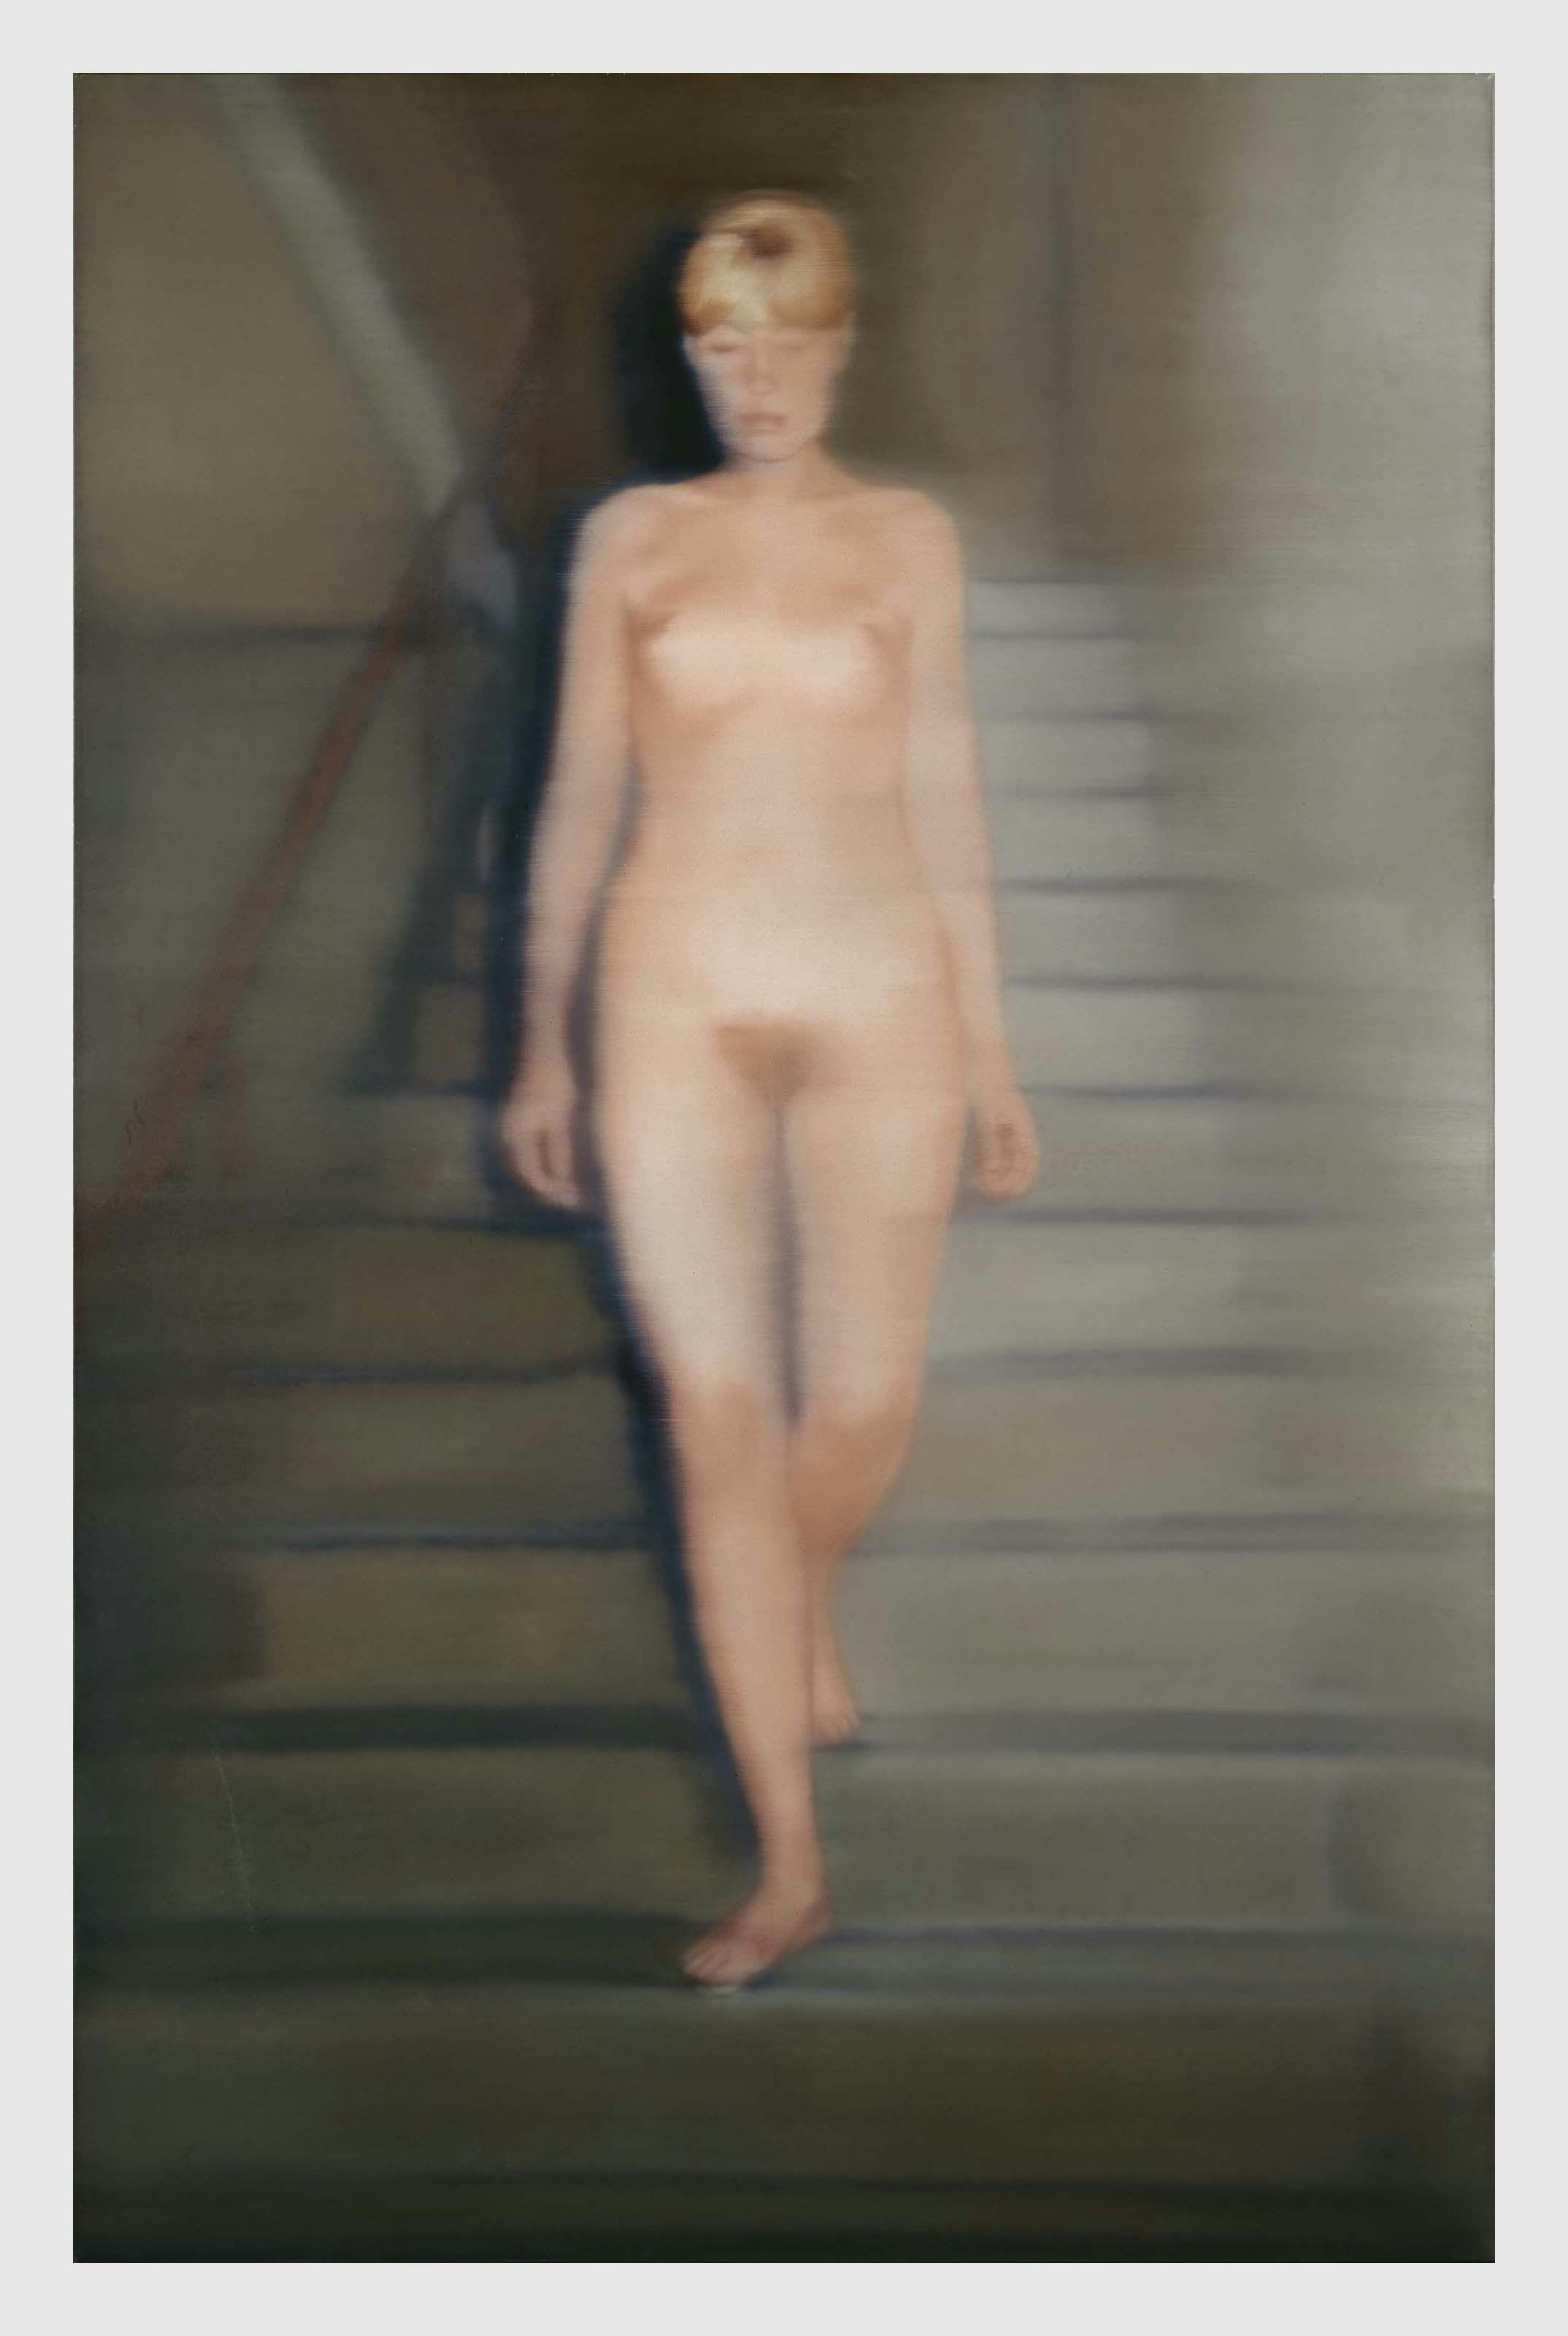 A painting by Gerhard Richter, titled Ema (Akf auf einer Treppe) (Ema [Nude on a Staircase]), dated 1966.